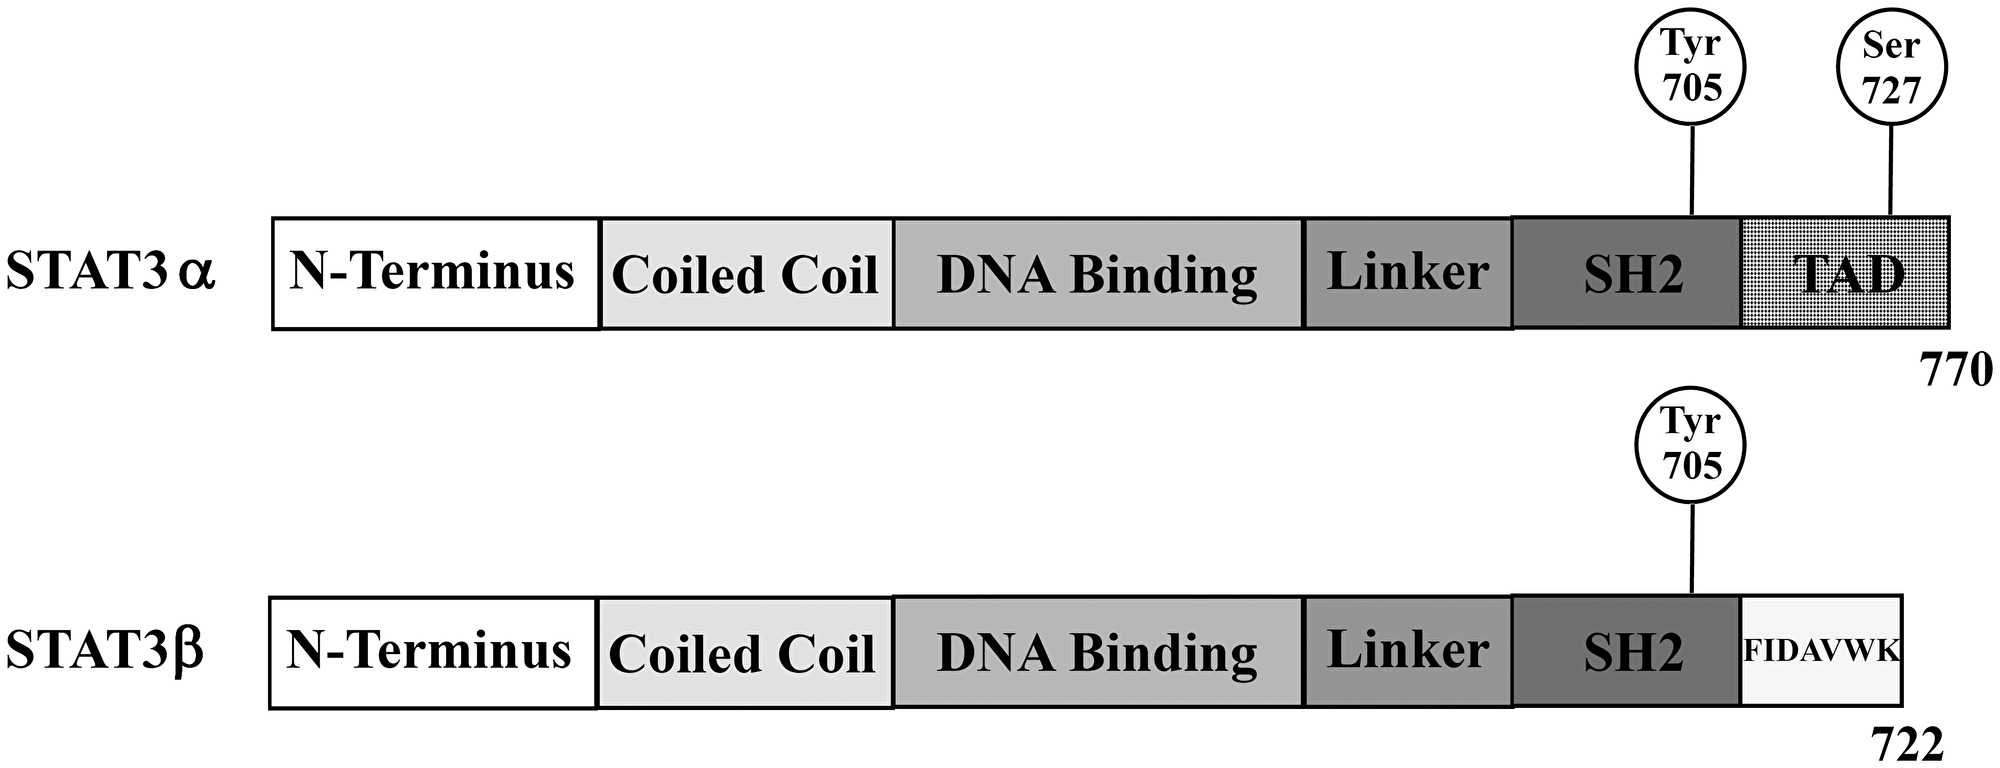 Schematic overview of the two alternatively spliced STAT3 isoforms STAT3α and STAT3β.